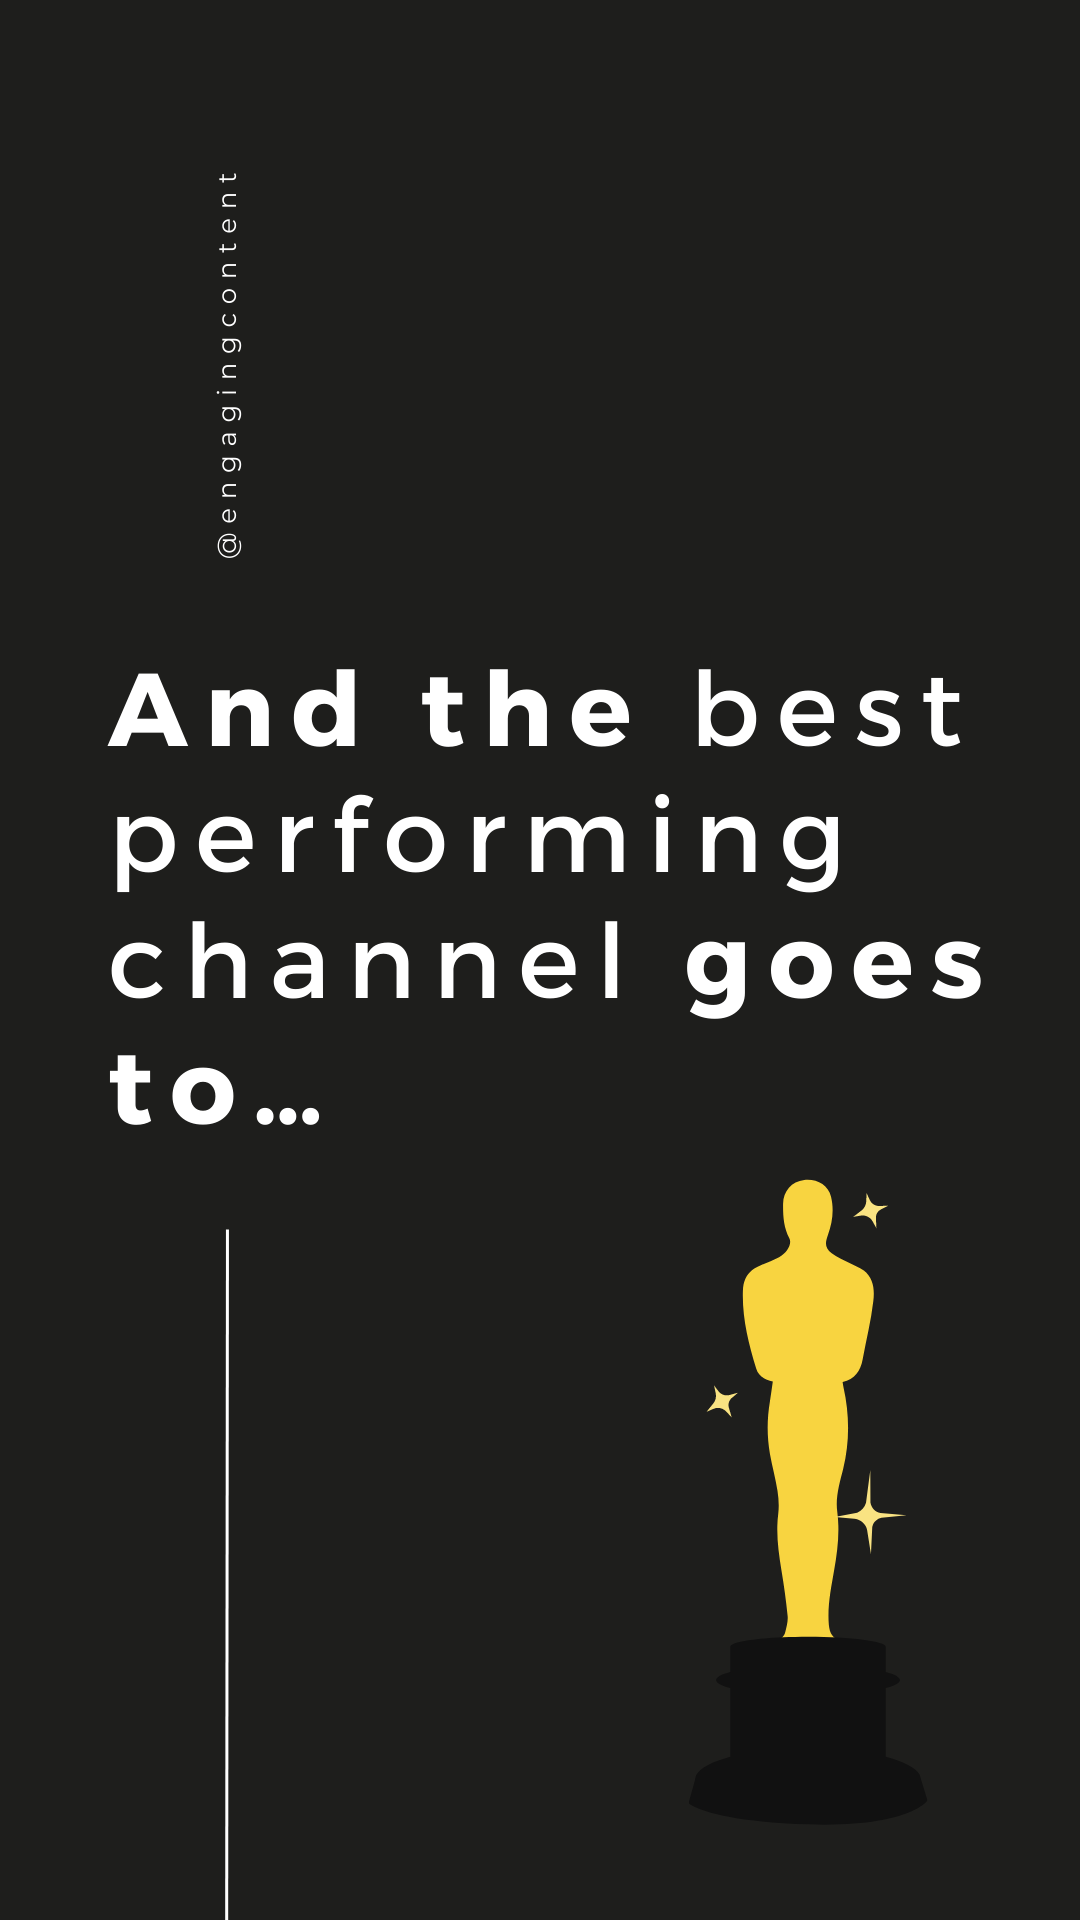 And the best performing channel goes to…